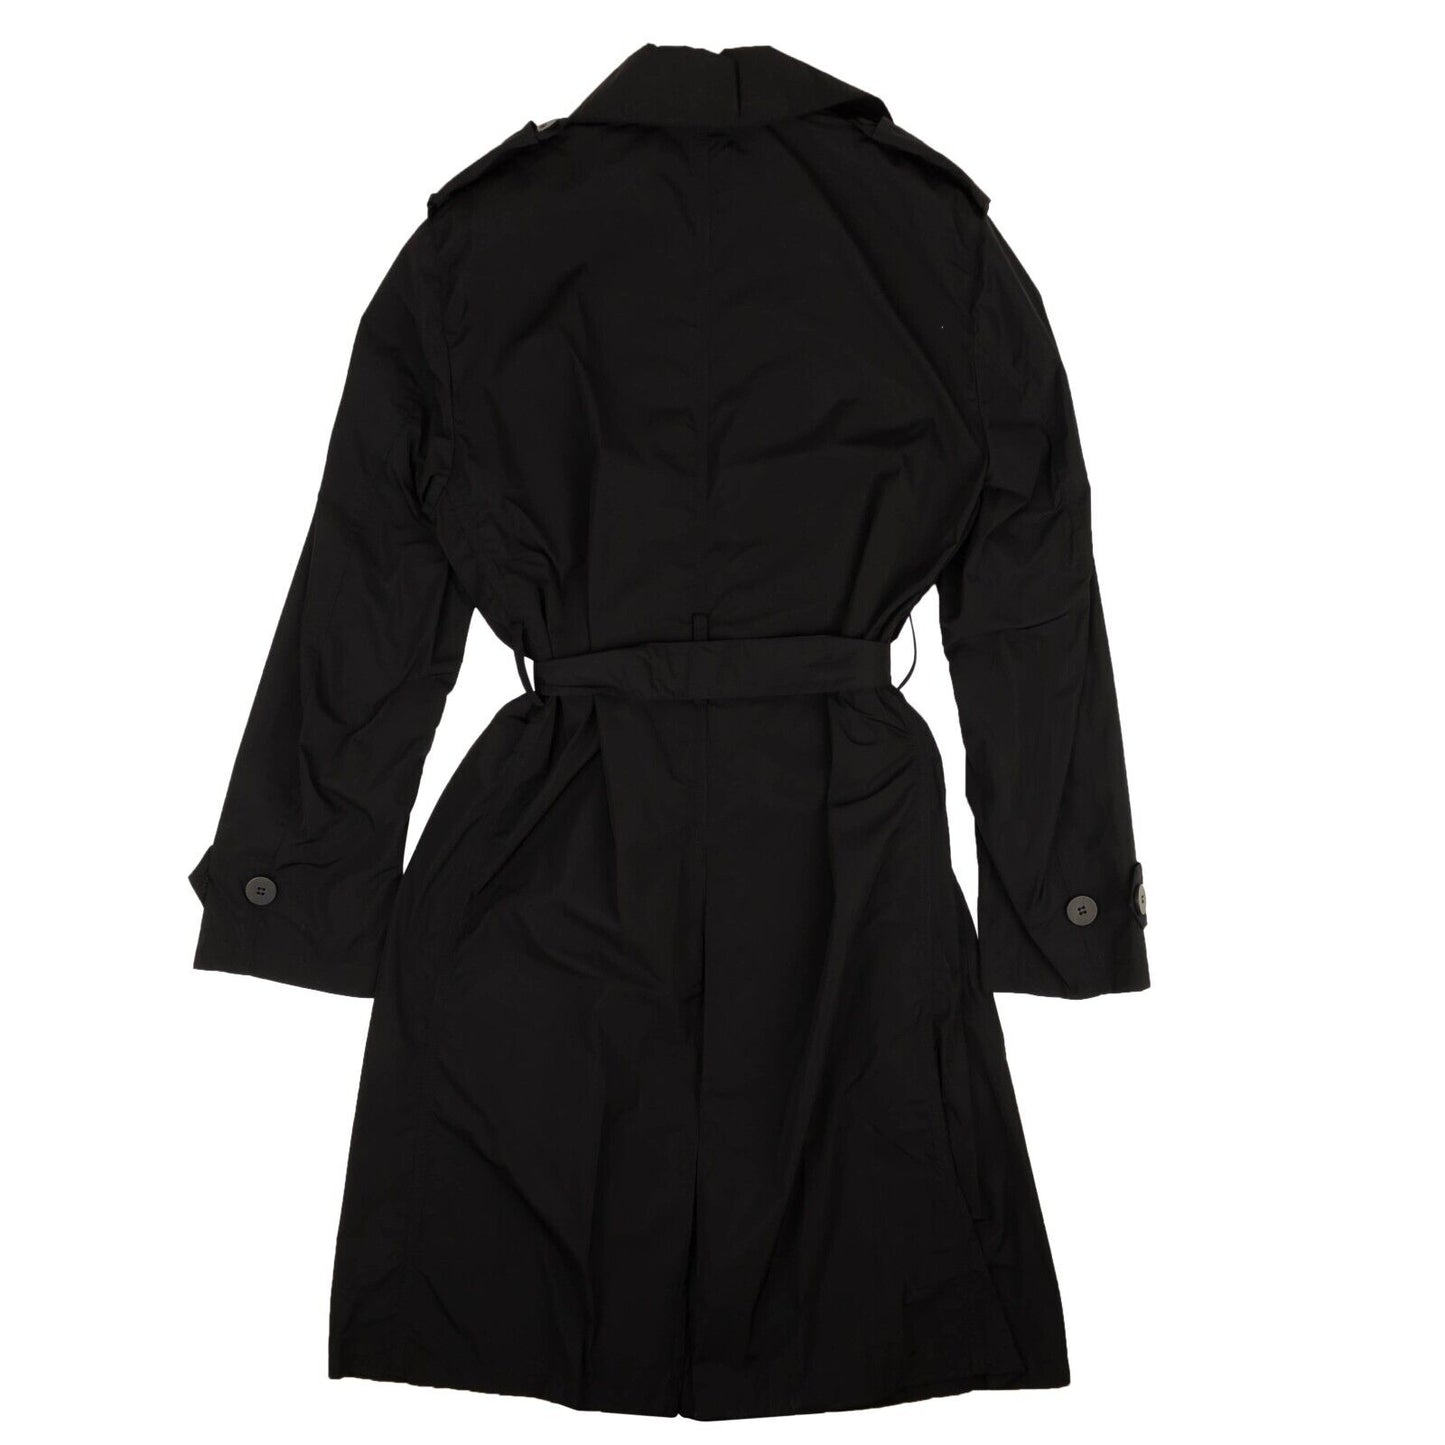 424 On Fairfax Long Wool Blend Trench Coat - Black